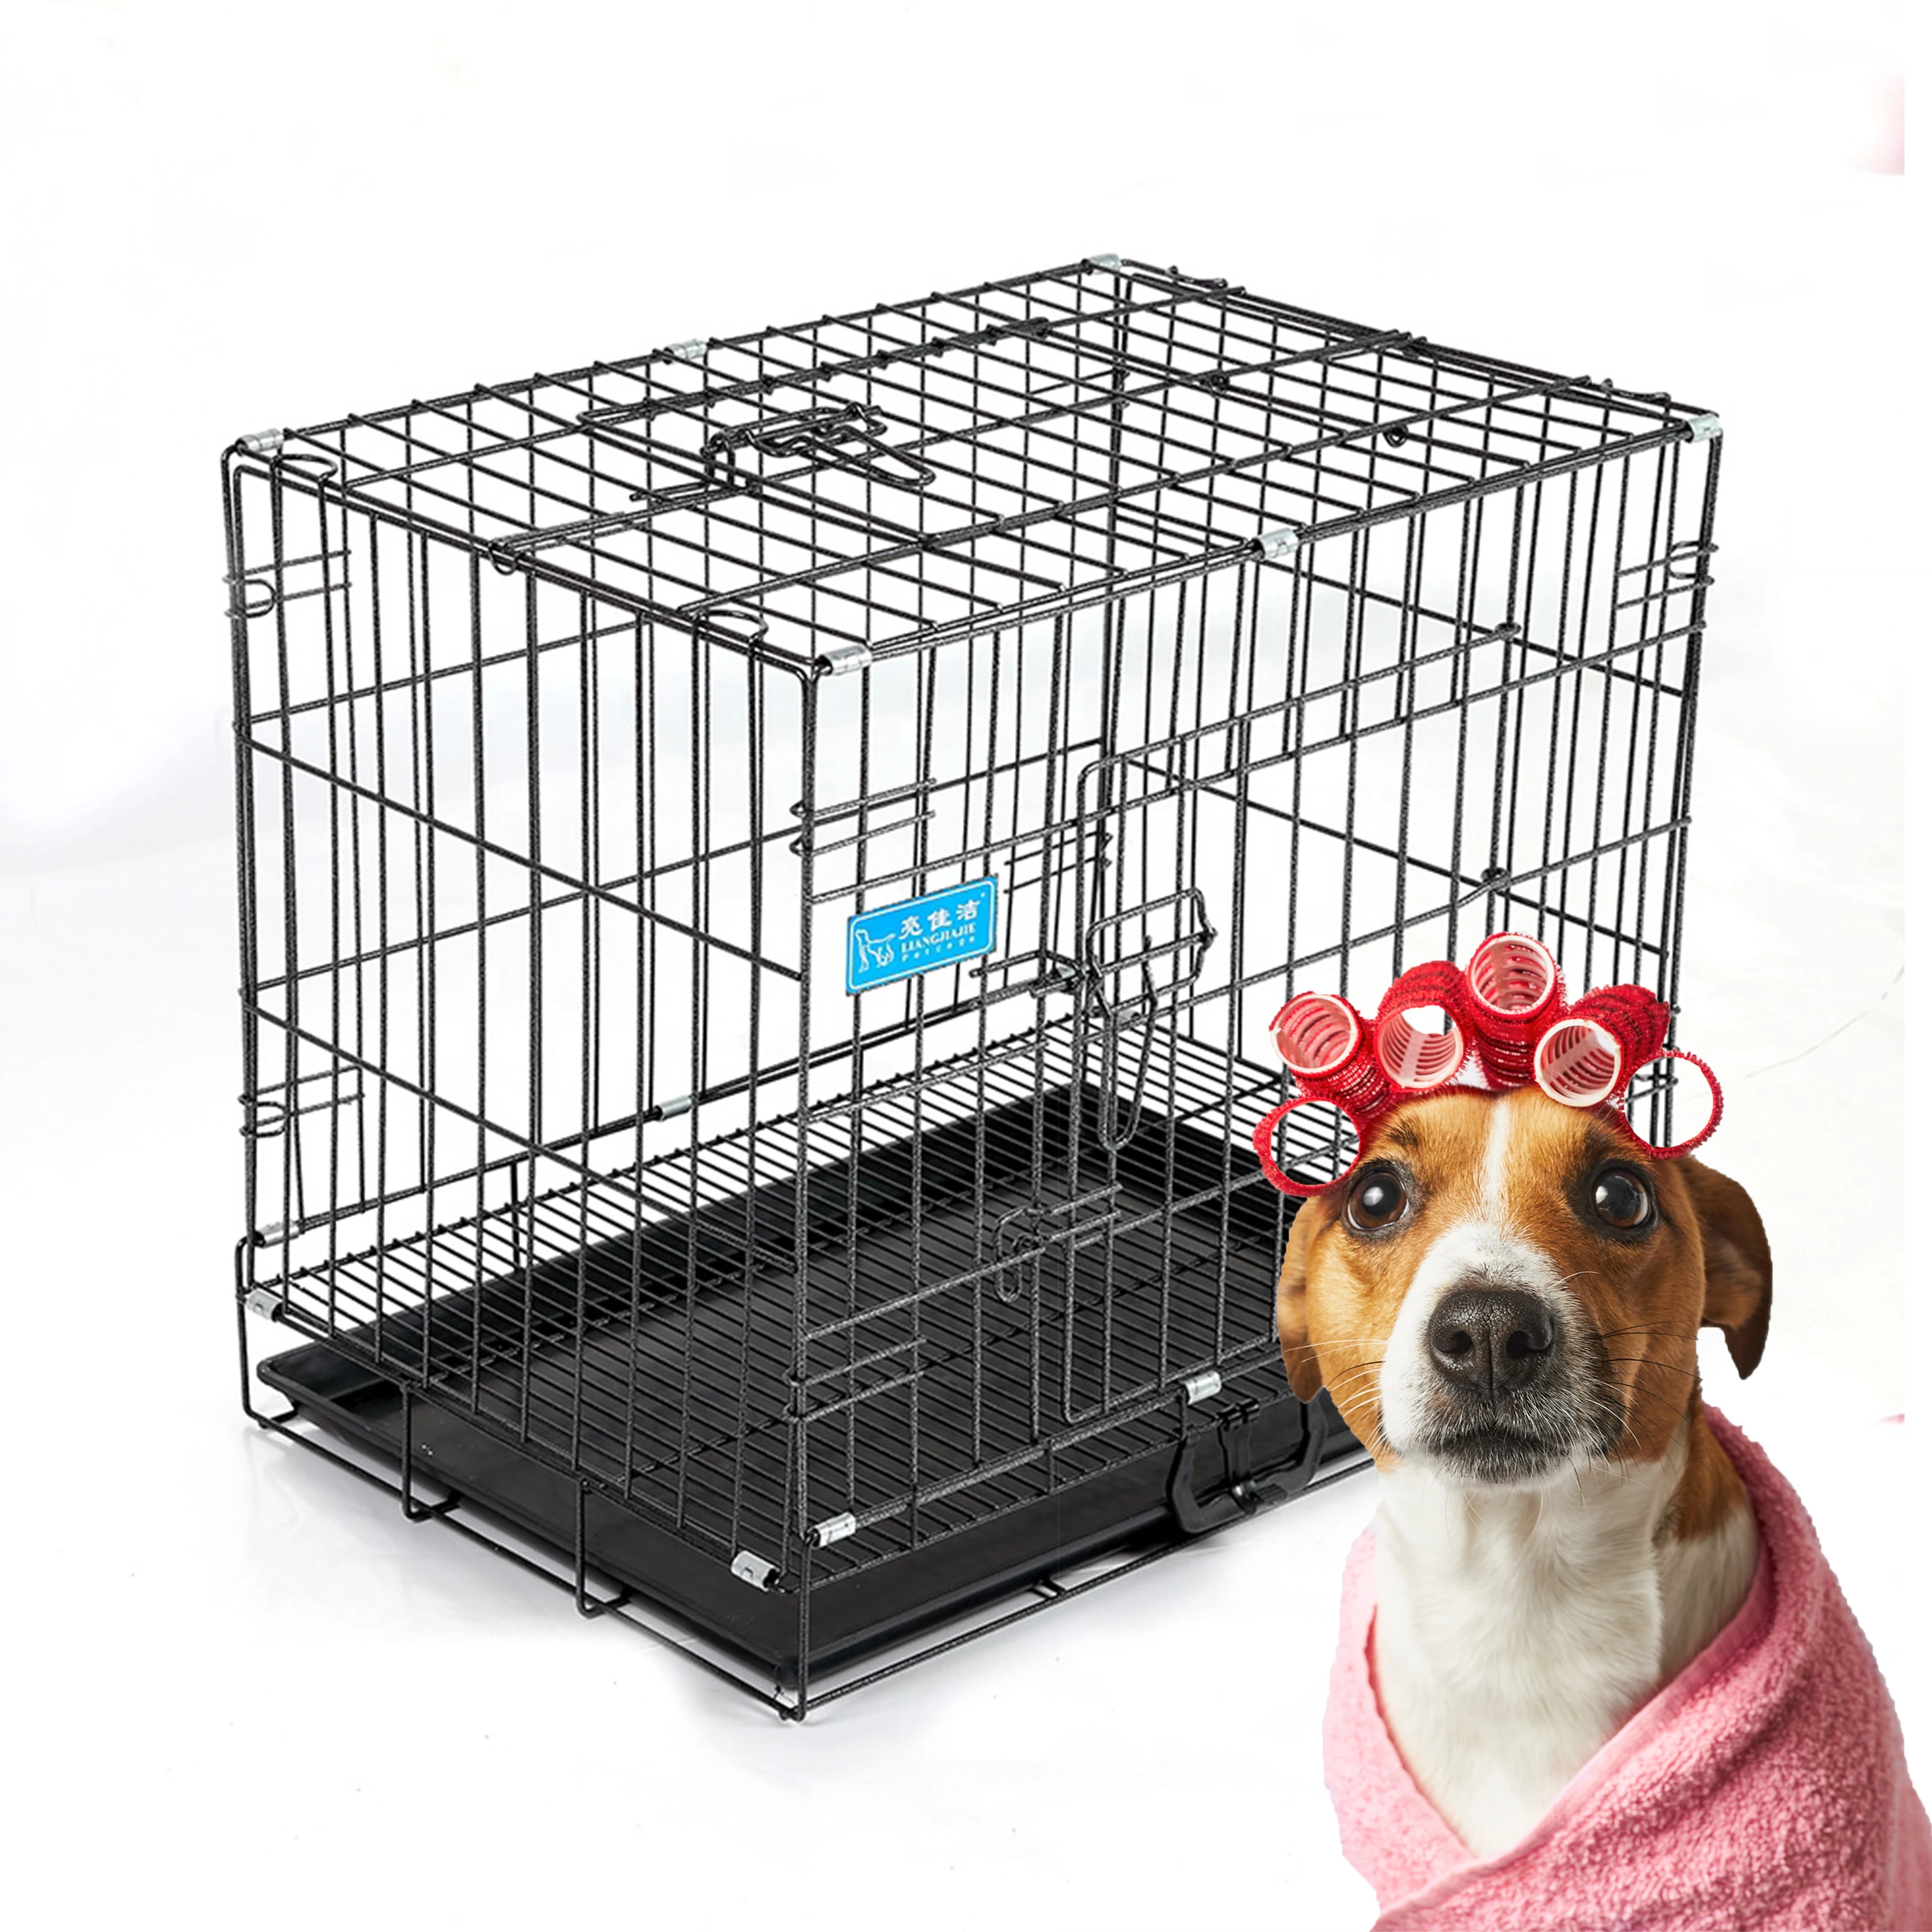 

LJA161 Best Quality Pet Large Folding Wire Pet Cages For Large Dog Cat House Metal Dog Crate Pet Cages, Blue/black